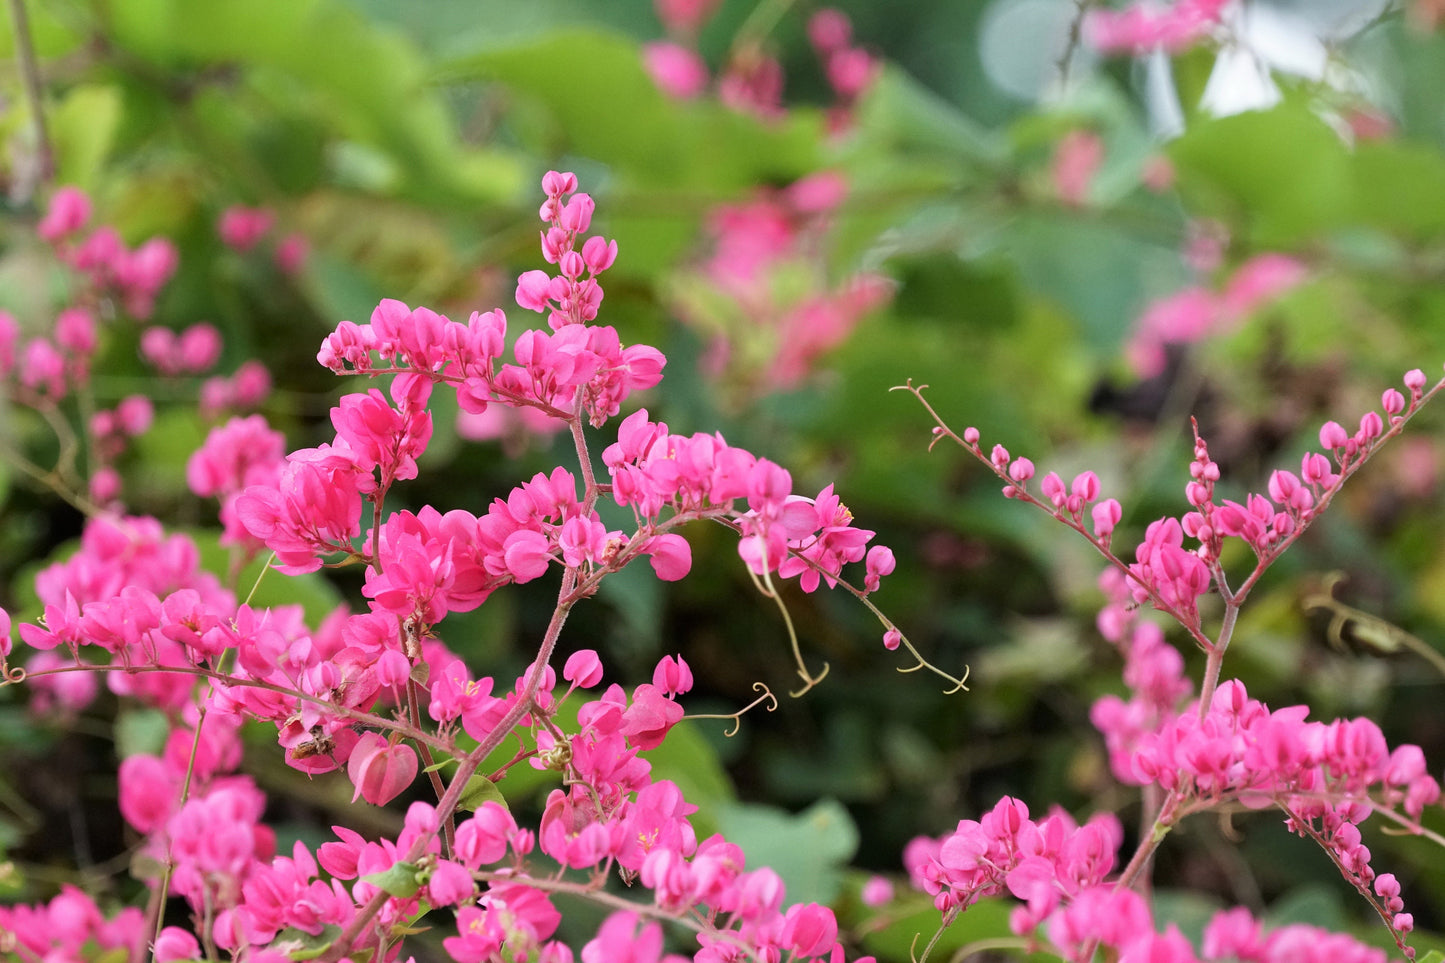 5 CORAL VINE Mexican Creeper Bee Bush Chain of Love Mountain Rose Antigonon Leptopus Bright Pink Climber Ground Cover Flower Seeds